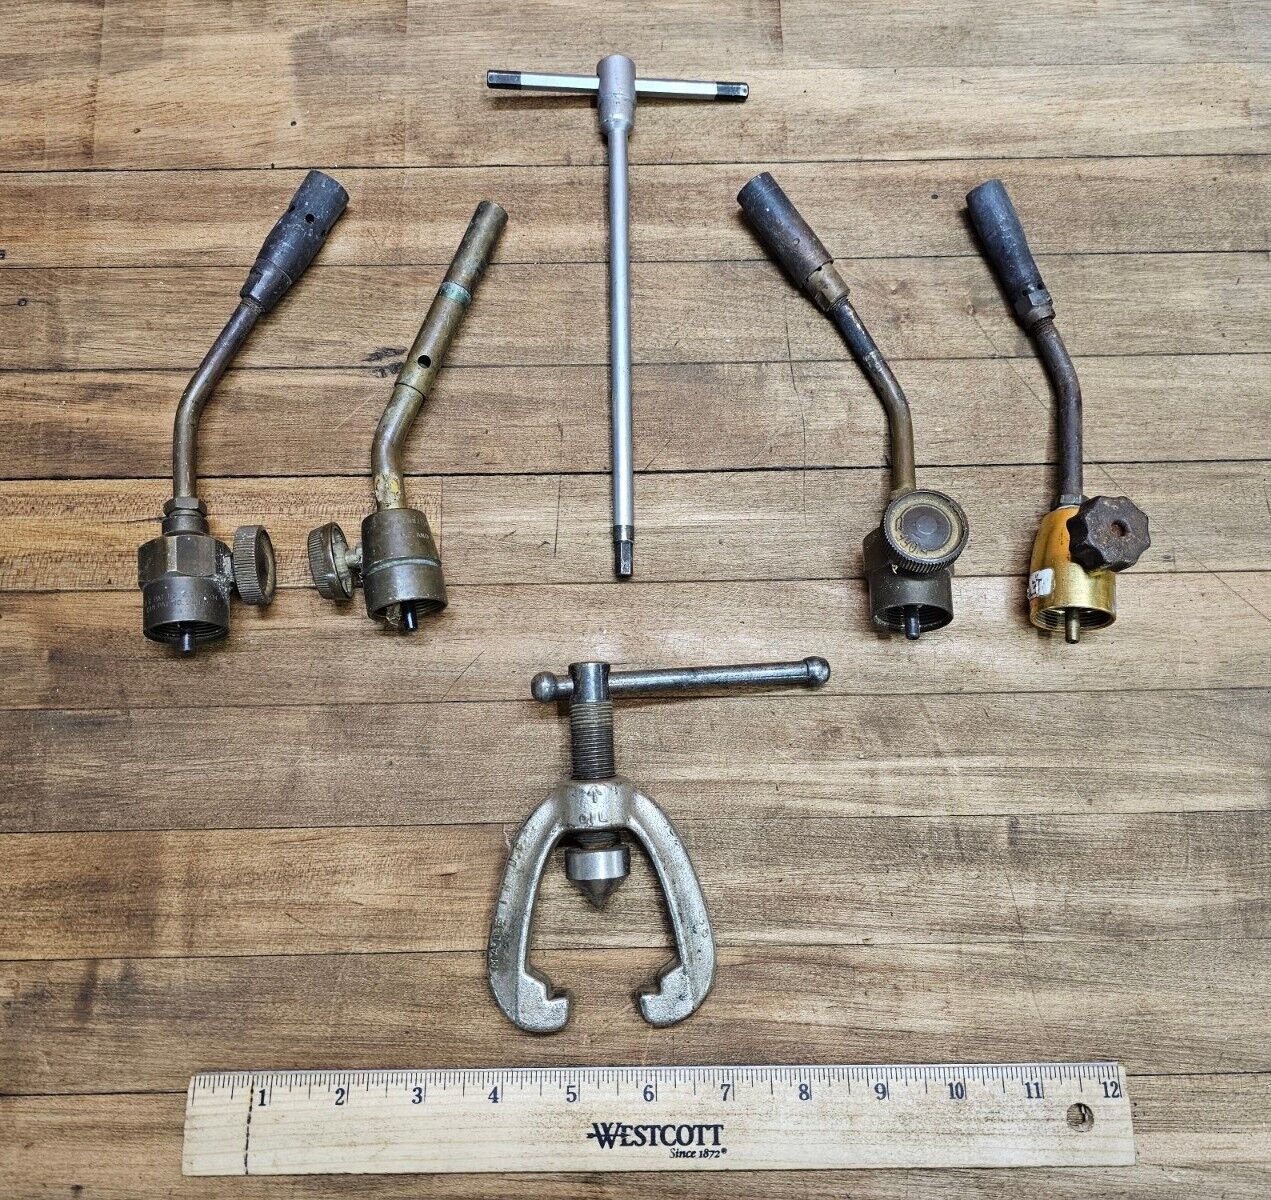 Vintage Plumbers Plumbing Tools Mixed Lot Wrenches Torches Flaring Tools ☆USA